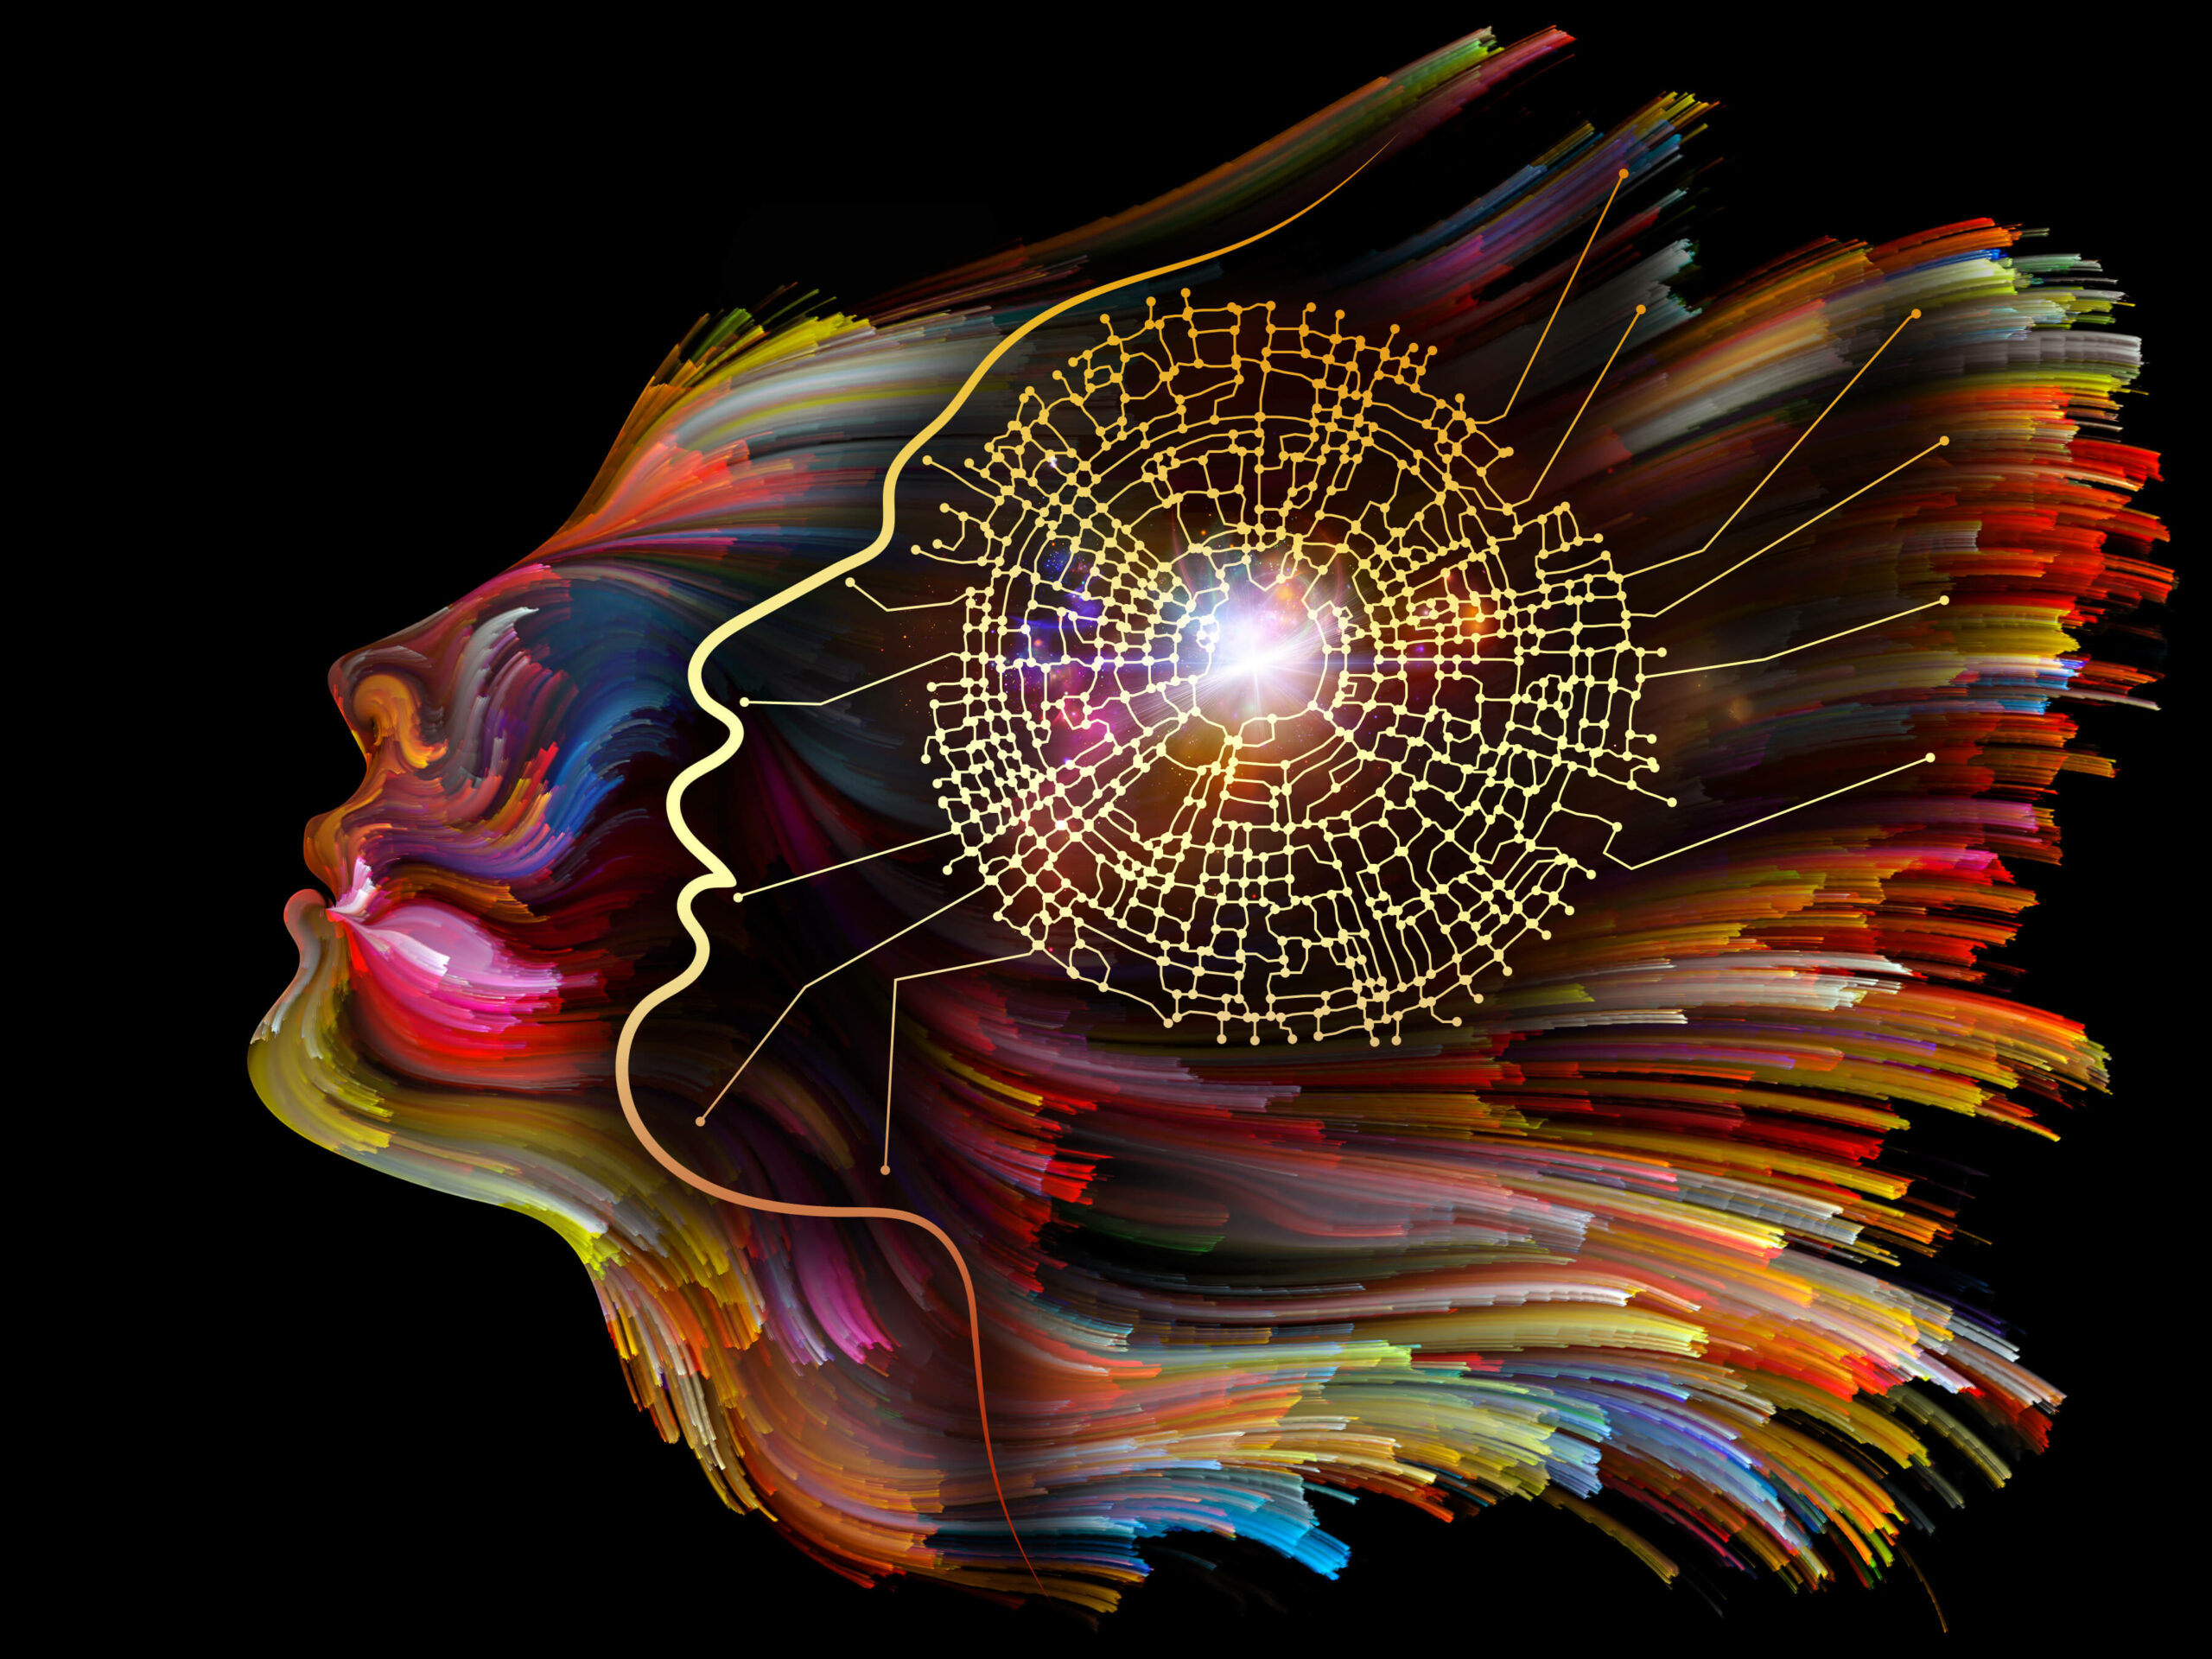 Abstract picture of an individual's profile made with lines of different colors representing the brain waves that are explored during Neurofeedback for ADHD in Washington, DC.